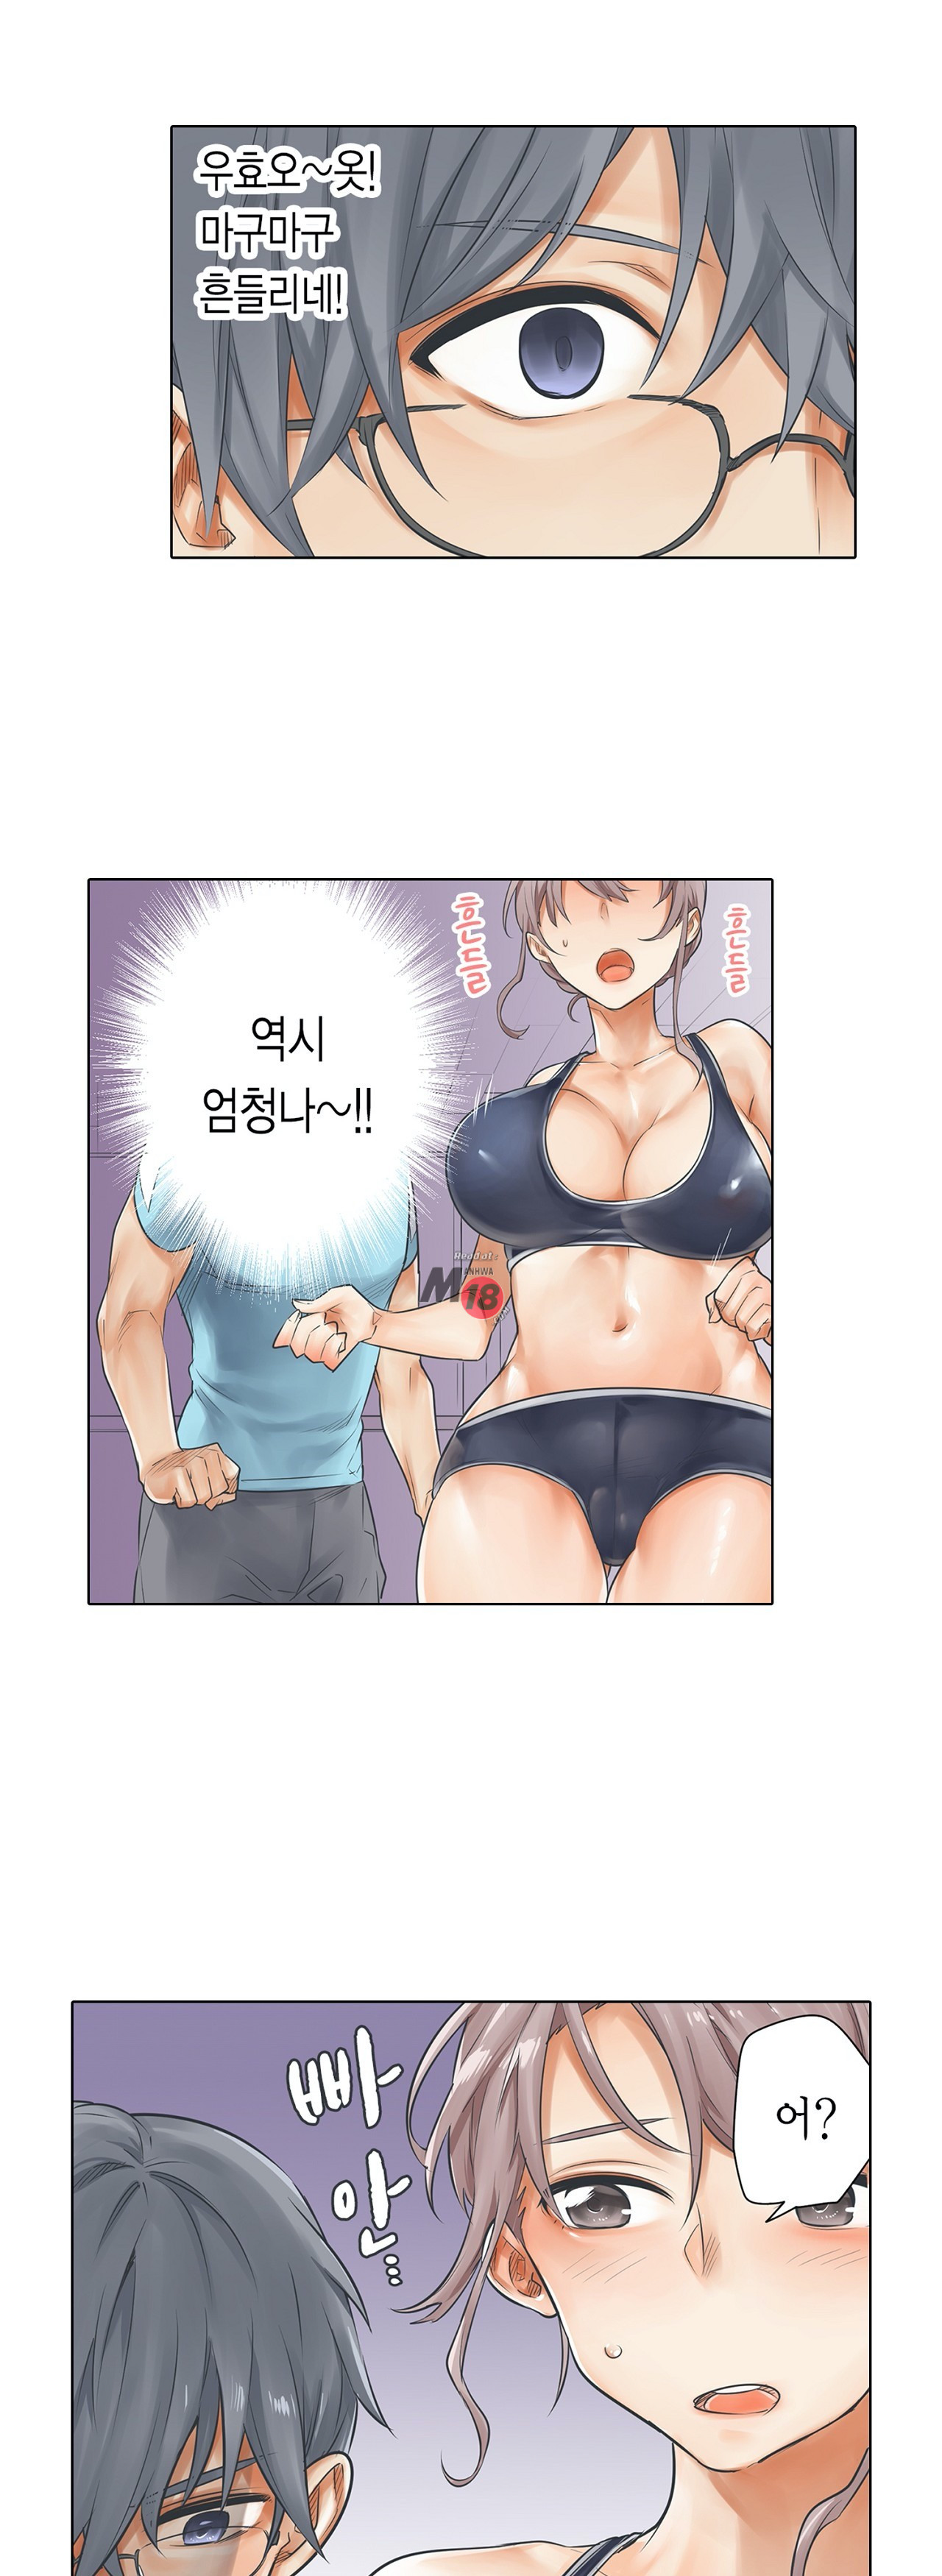 A Sweaty Sexercise Raw - Chapter 7 Page 8